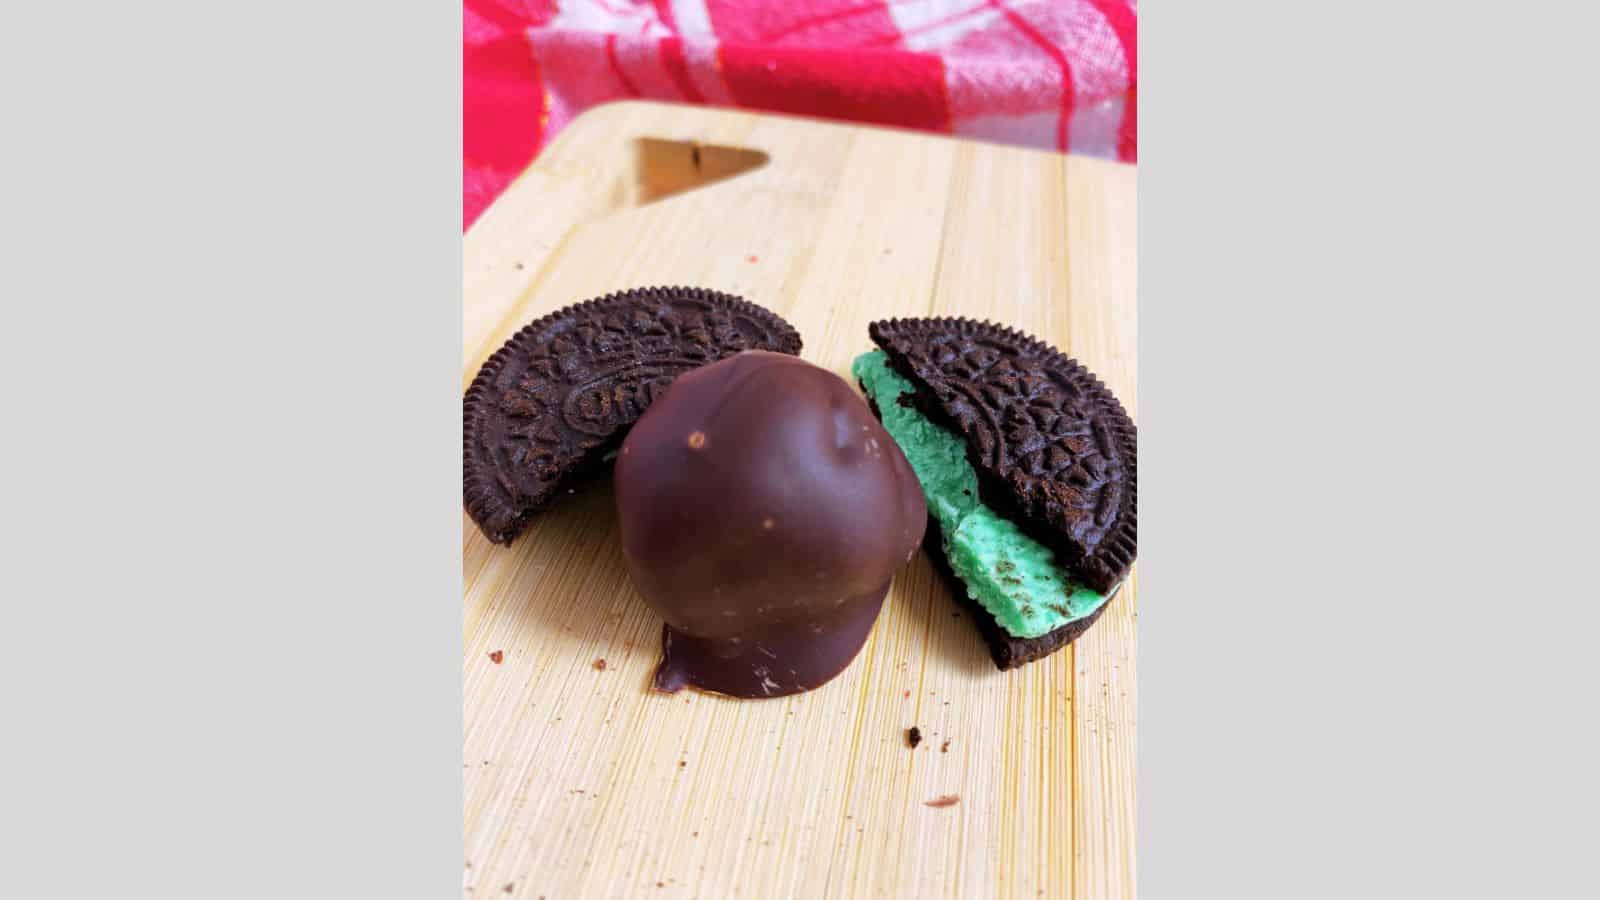 A mint truffle in the middle of a broken mint Oreo cookie with green icing.